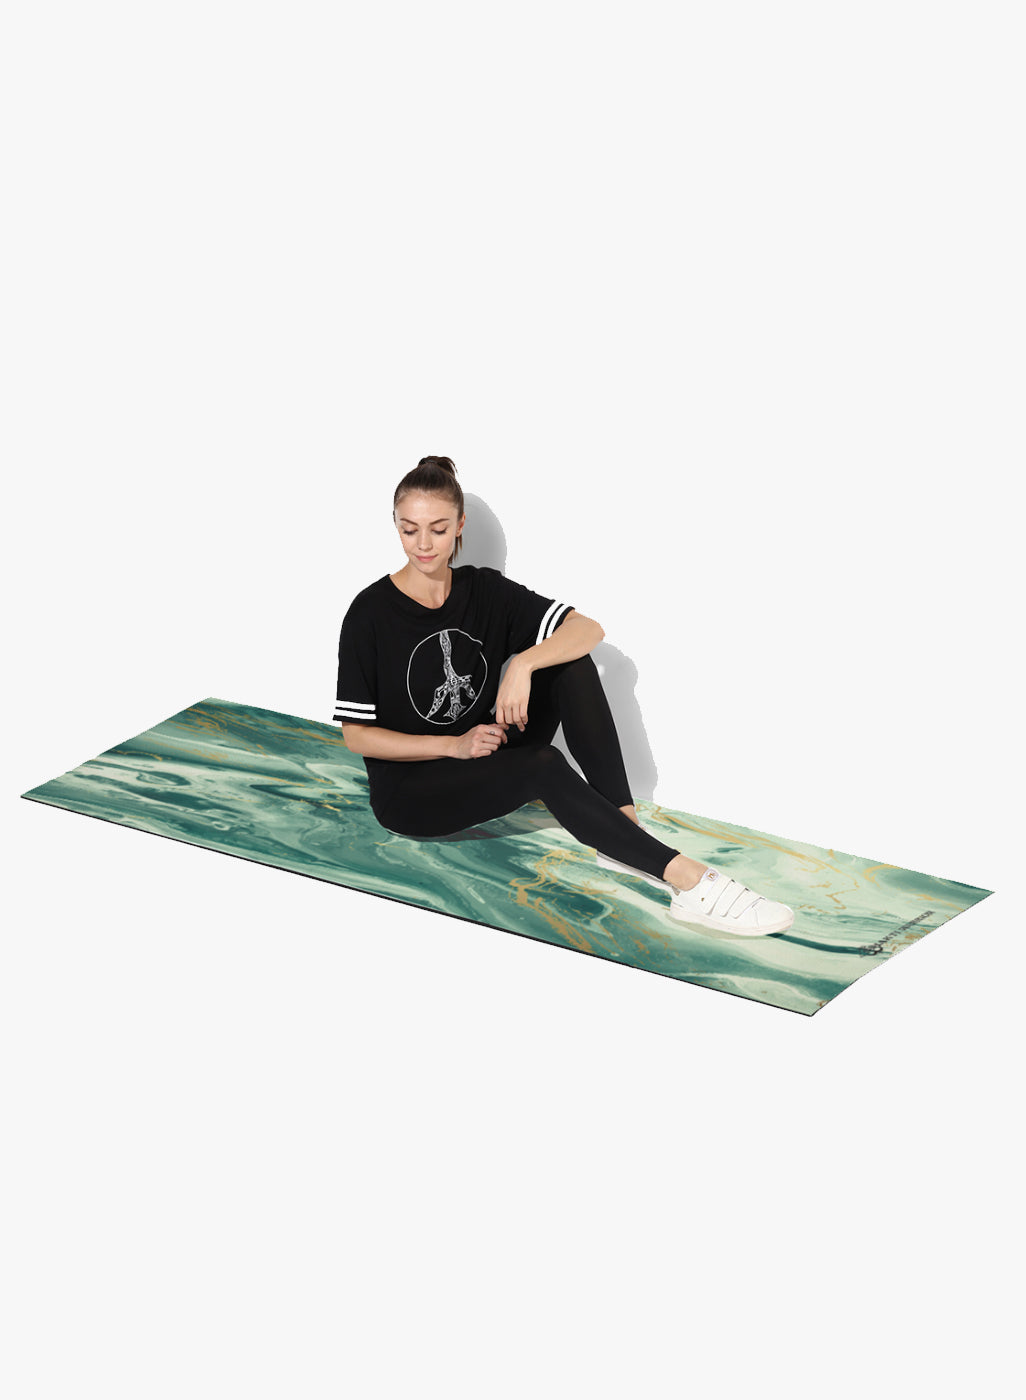 Shakti Warrior Heart Chakra Hemp Yoga Mat - Inspired by Anahata chakra, crafted from sustainable hemp. Optimal grip, joint support, and non-slip performance for a harmonious yoga practice.